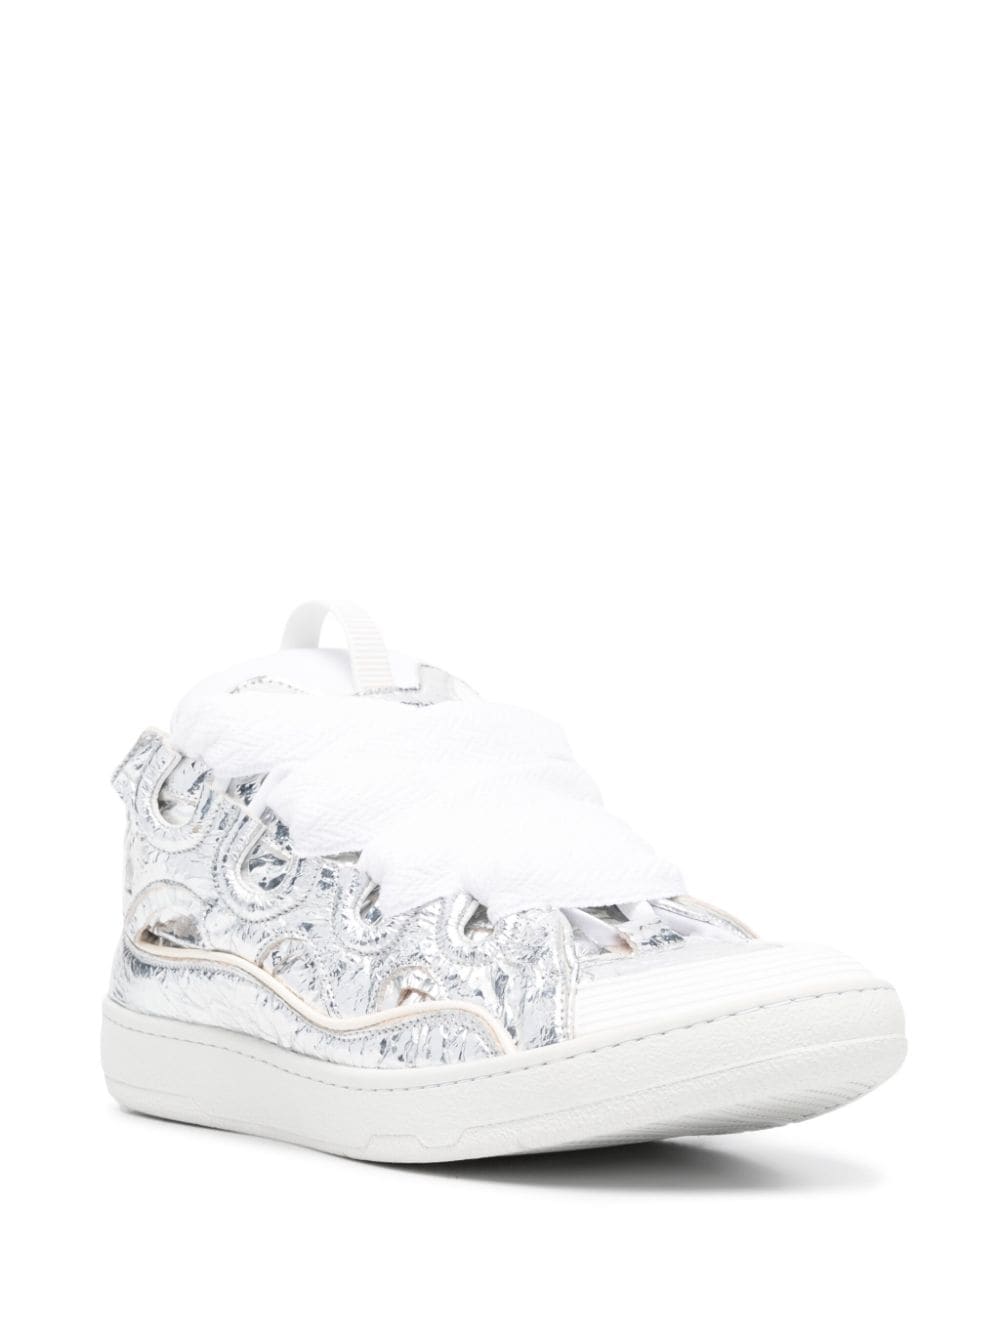 Shop Lanvin Curb Metallic Leather Sneakers In Silver